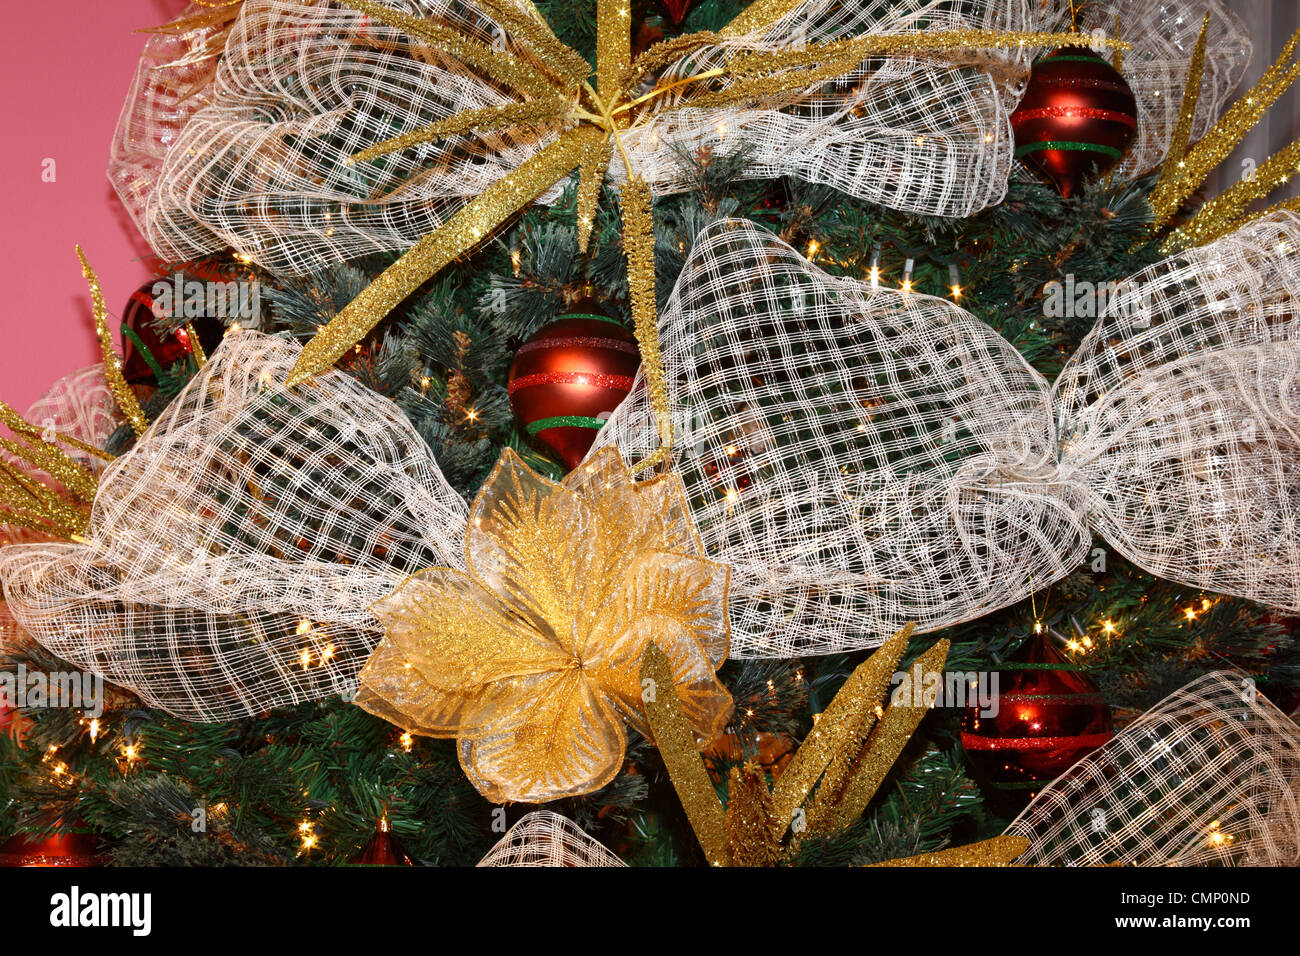 Detail of Christmas tree with decorations Stock Photo